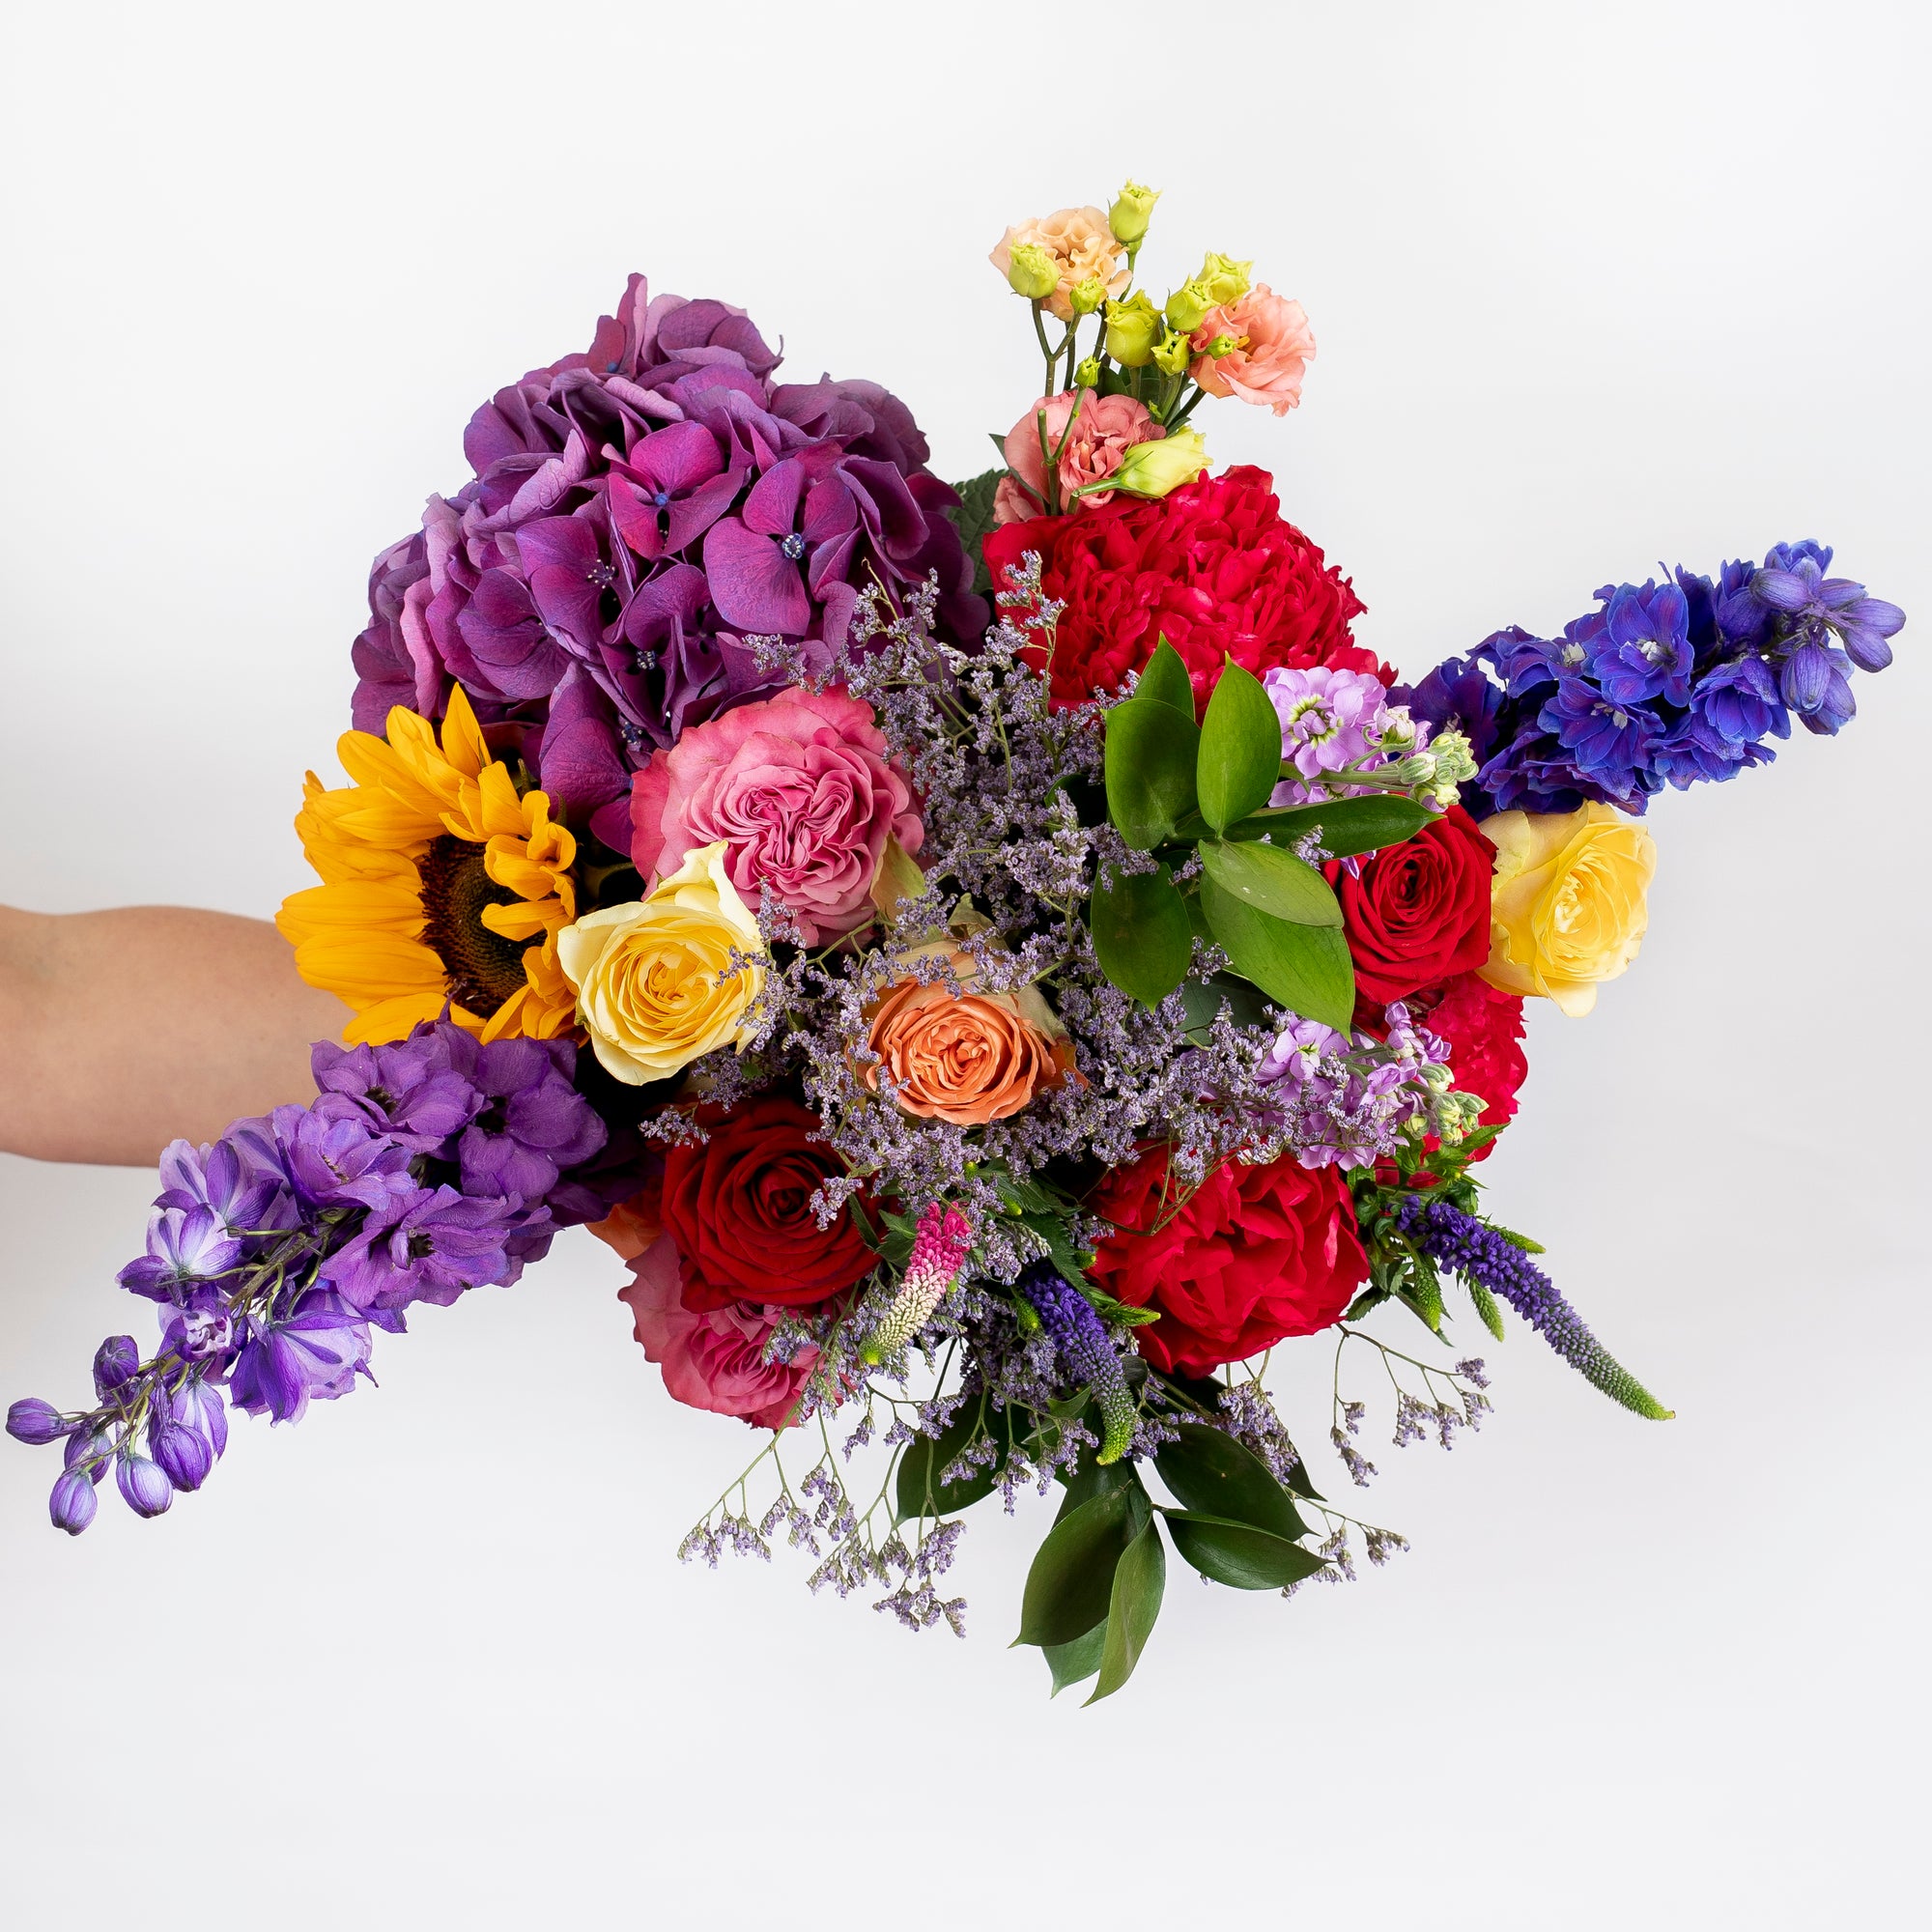 The Benefits of a Corporate Flower Subscription Service